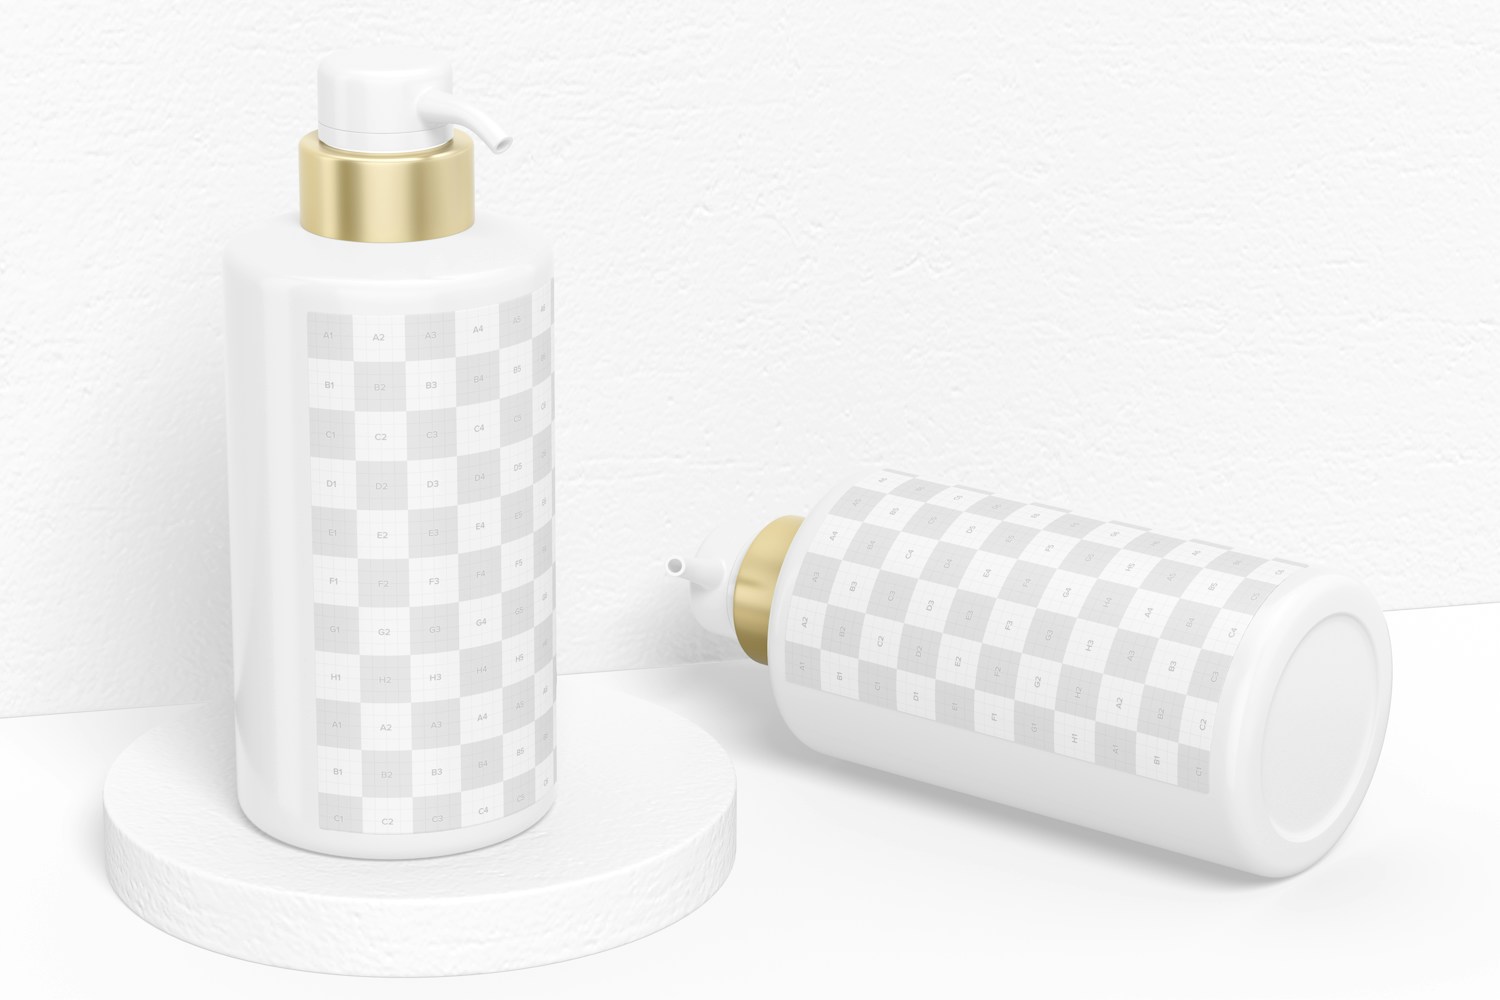 300 ml Shampoo Bottle Mockup, Standing and Dropped